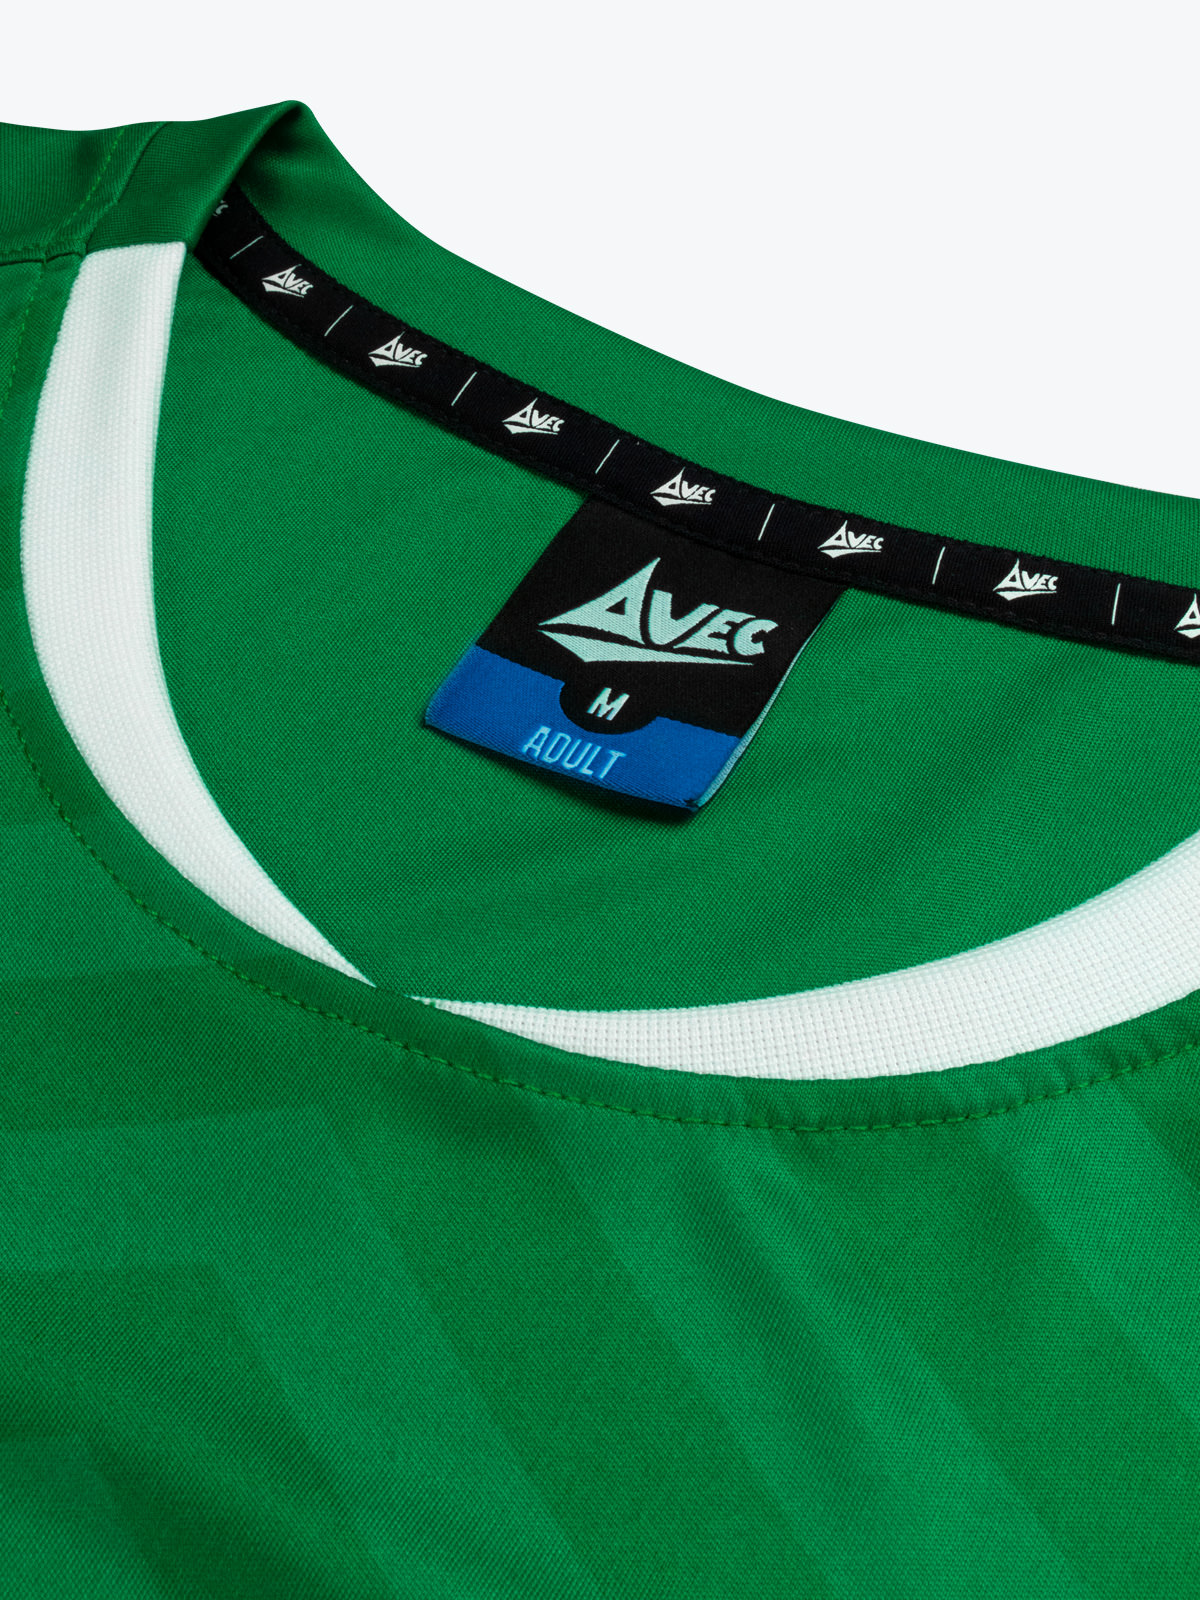 picture of team id pro jersey - green